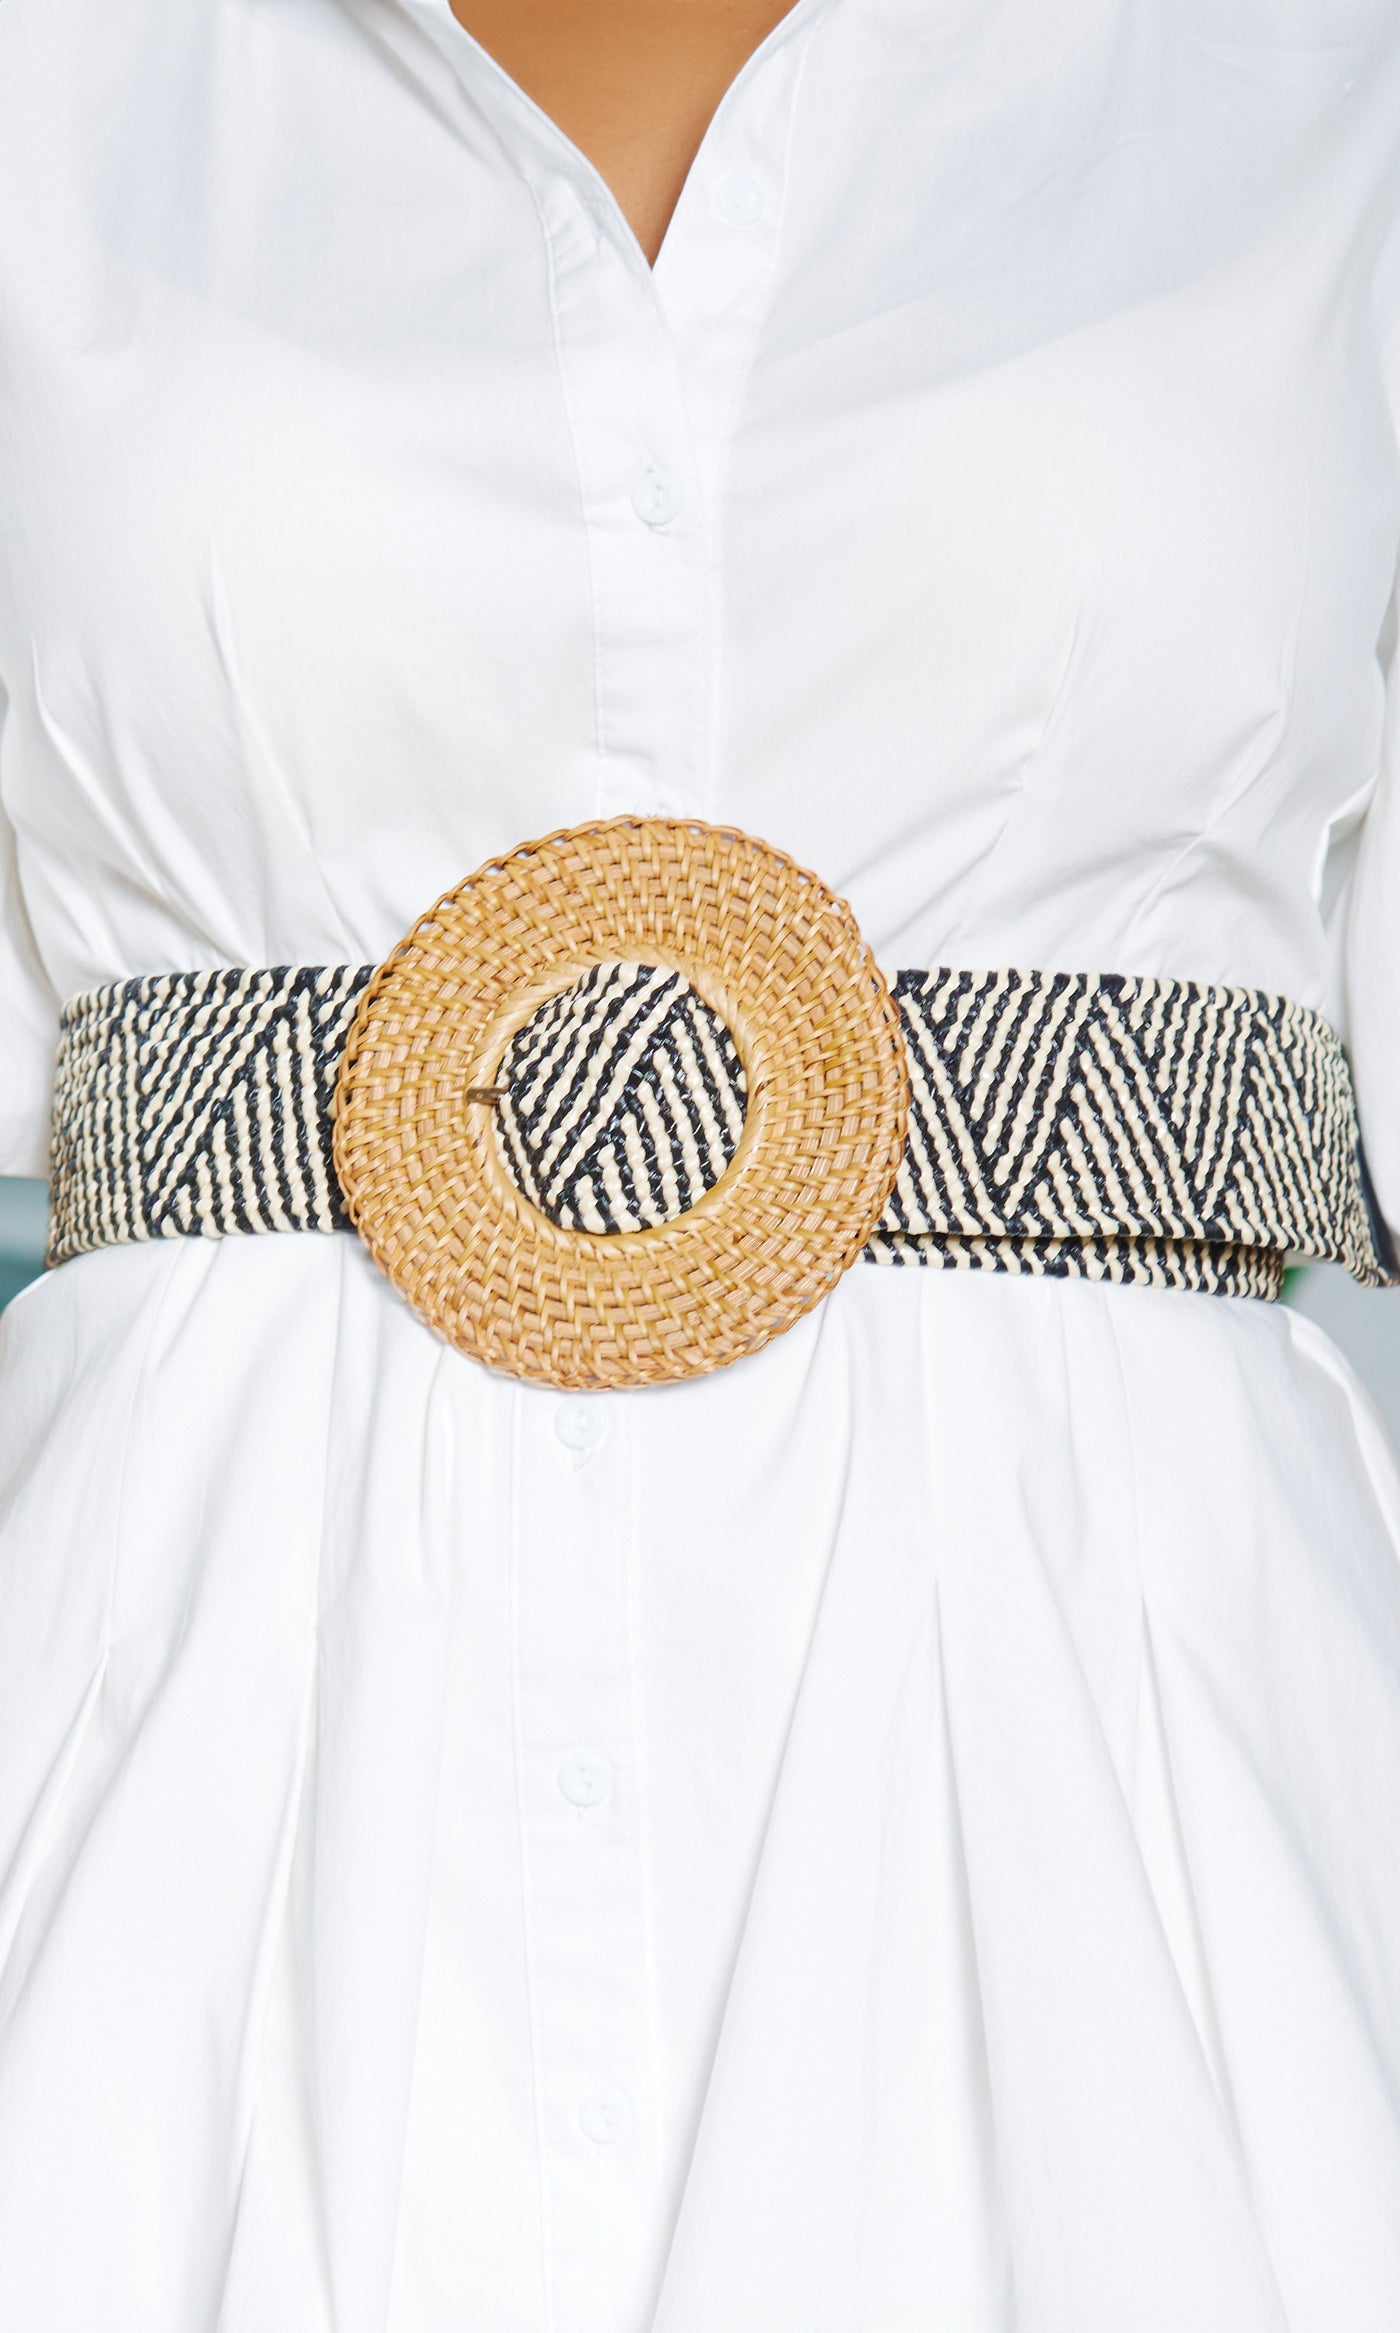 Elegant Contrast Belt with Circle Buckle - Cutely Covered